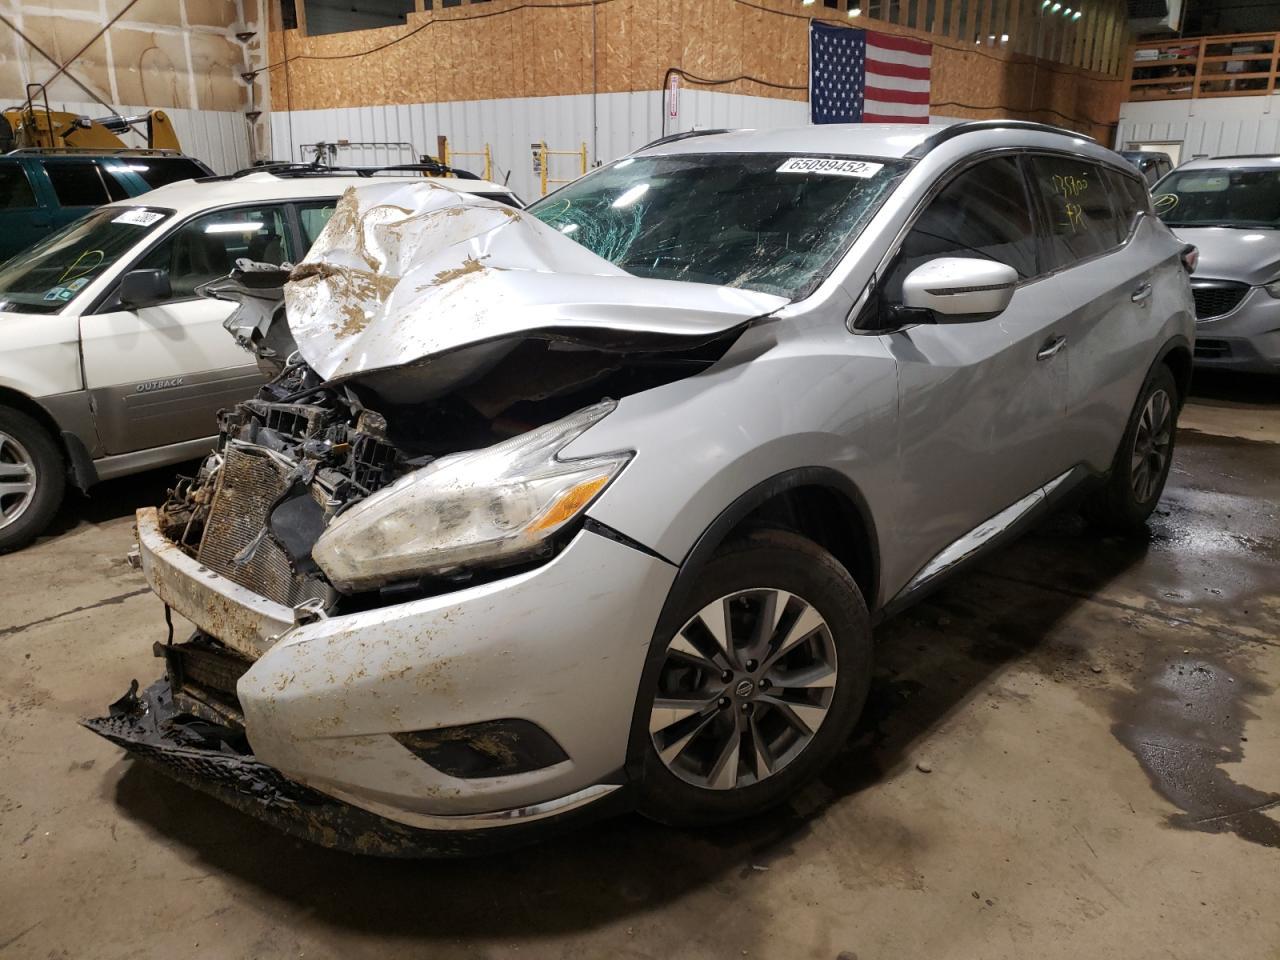 Buy 2017 Nissan Murano S 3.5L 5N1AZ2MG6HN****** from USA Auctions 